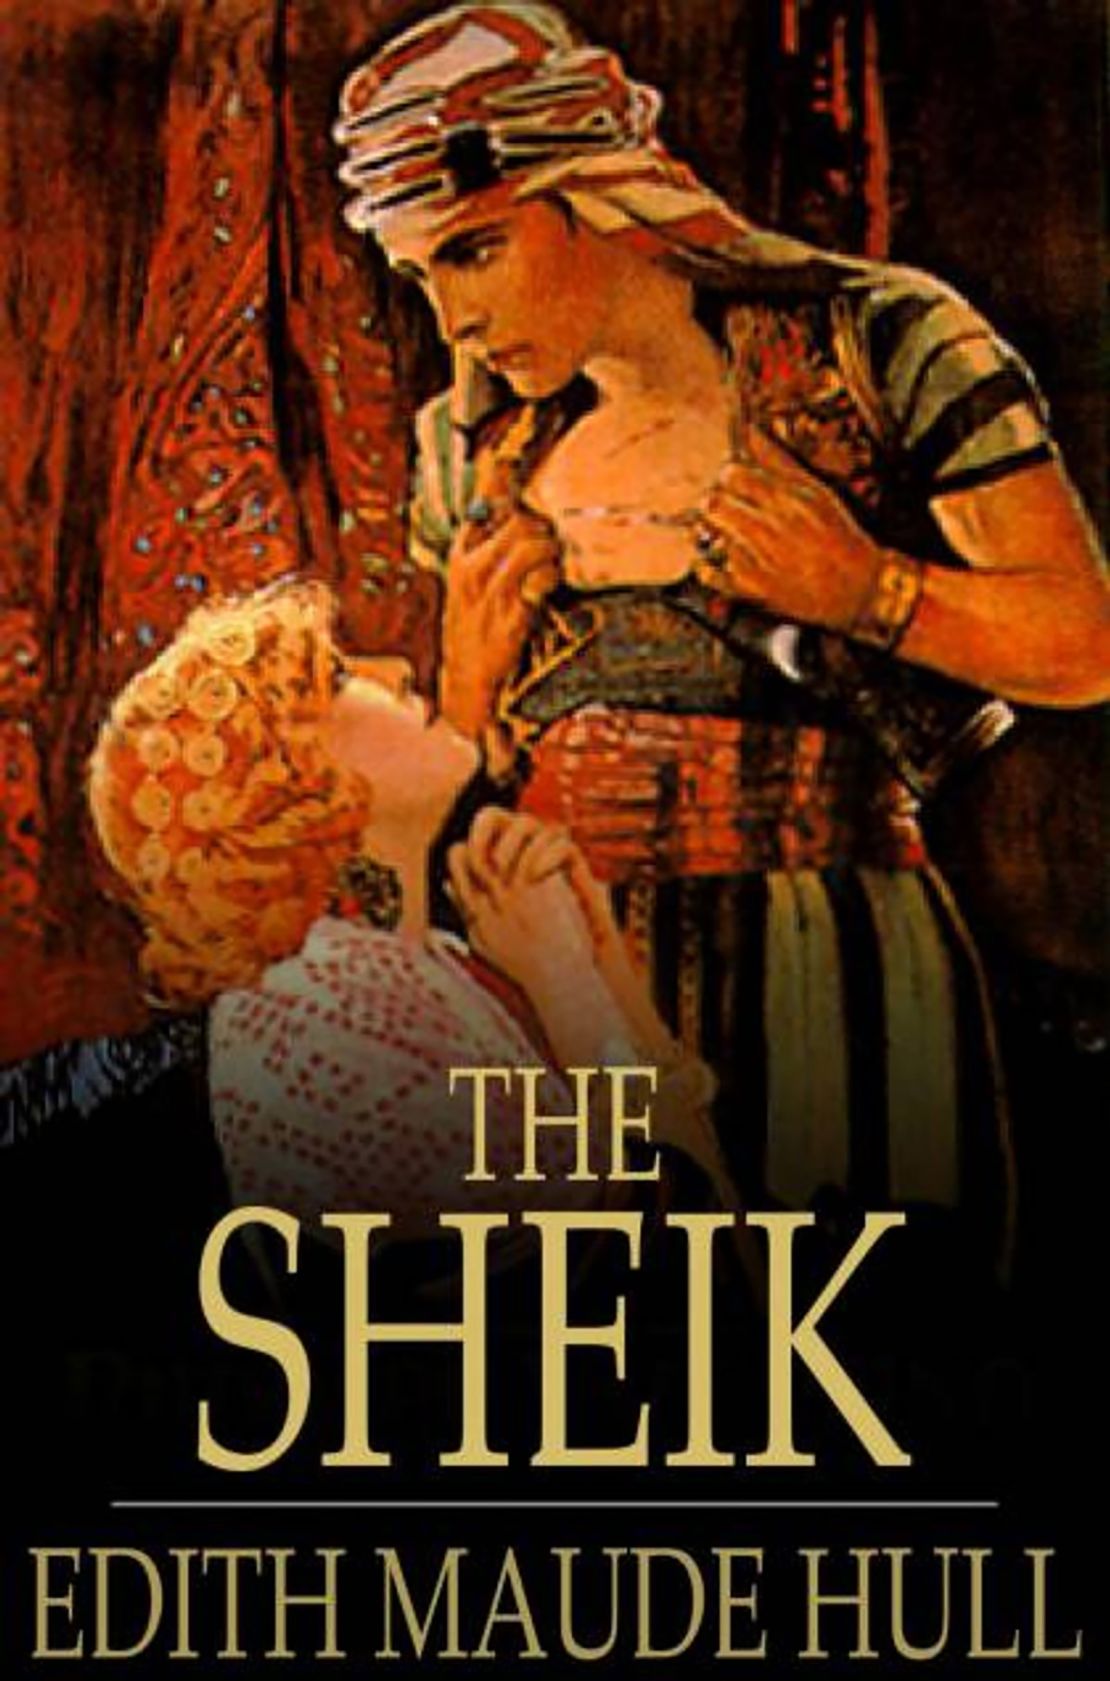 "The Sheik," published in 1919.